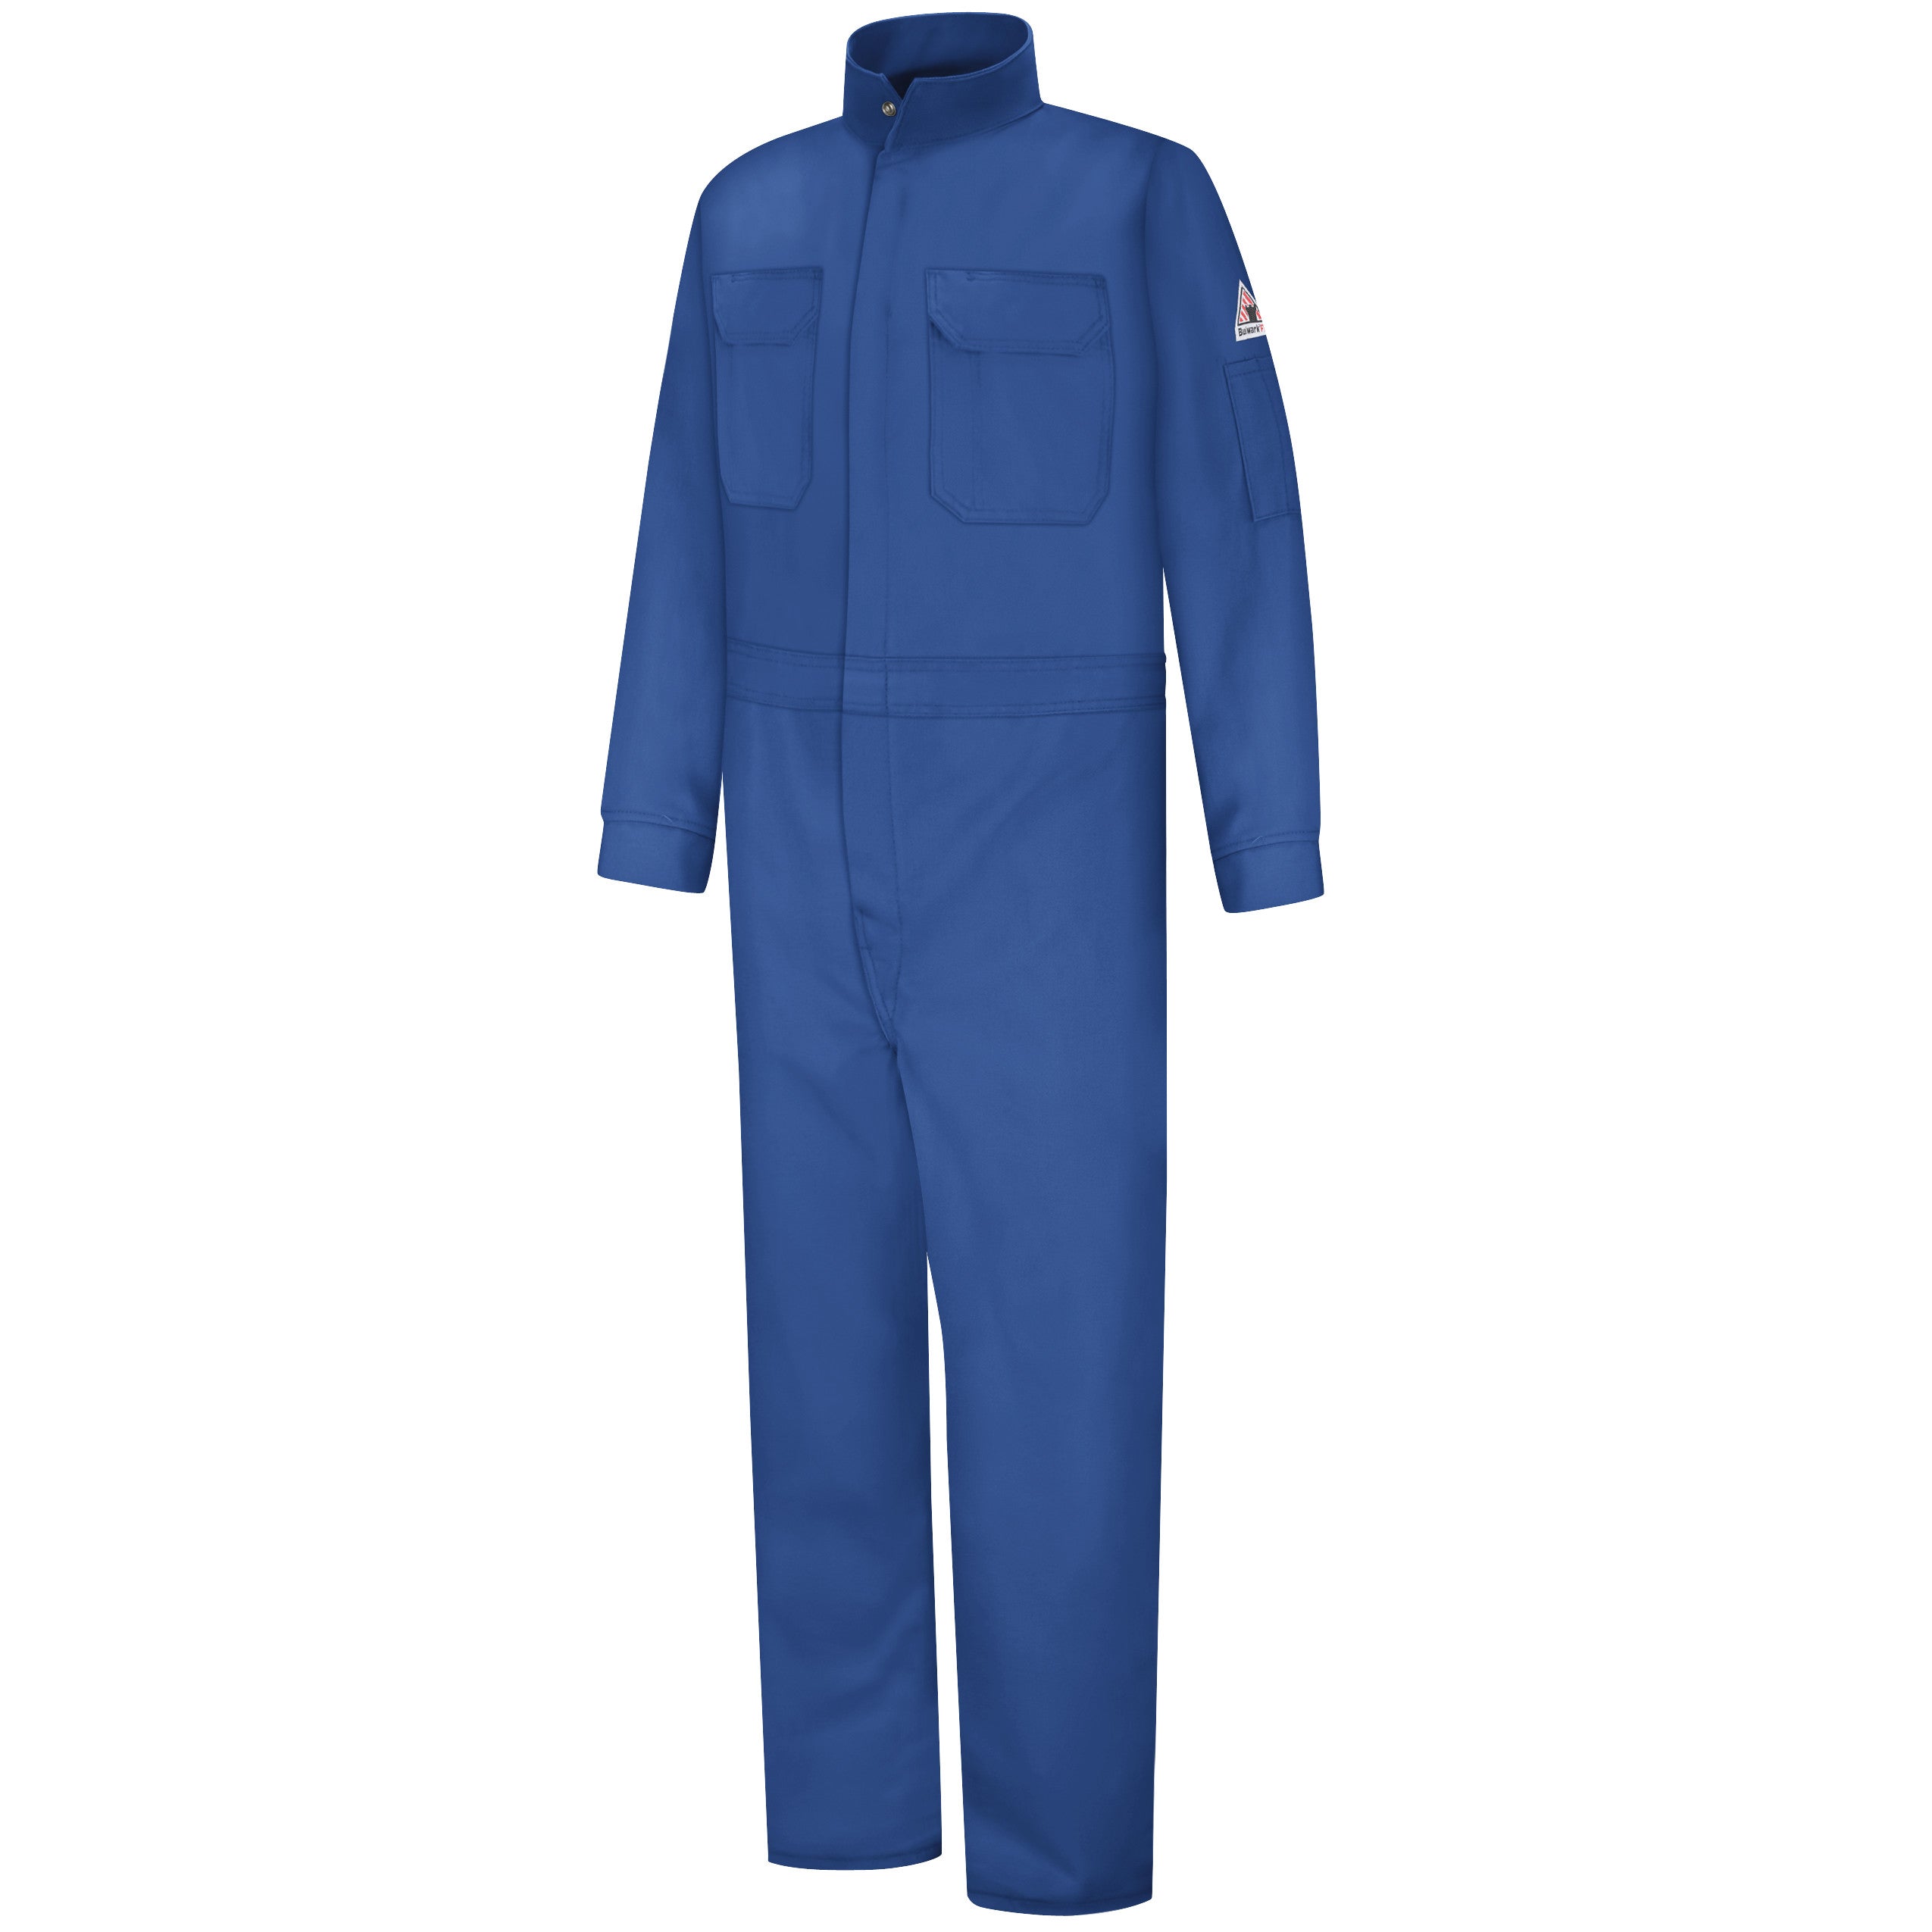 Women's Midweight Excel FR® ComforTouch® Premium Coverall CLB7 - Royal Blue-eSafety Supplies, Inc